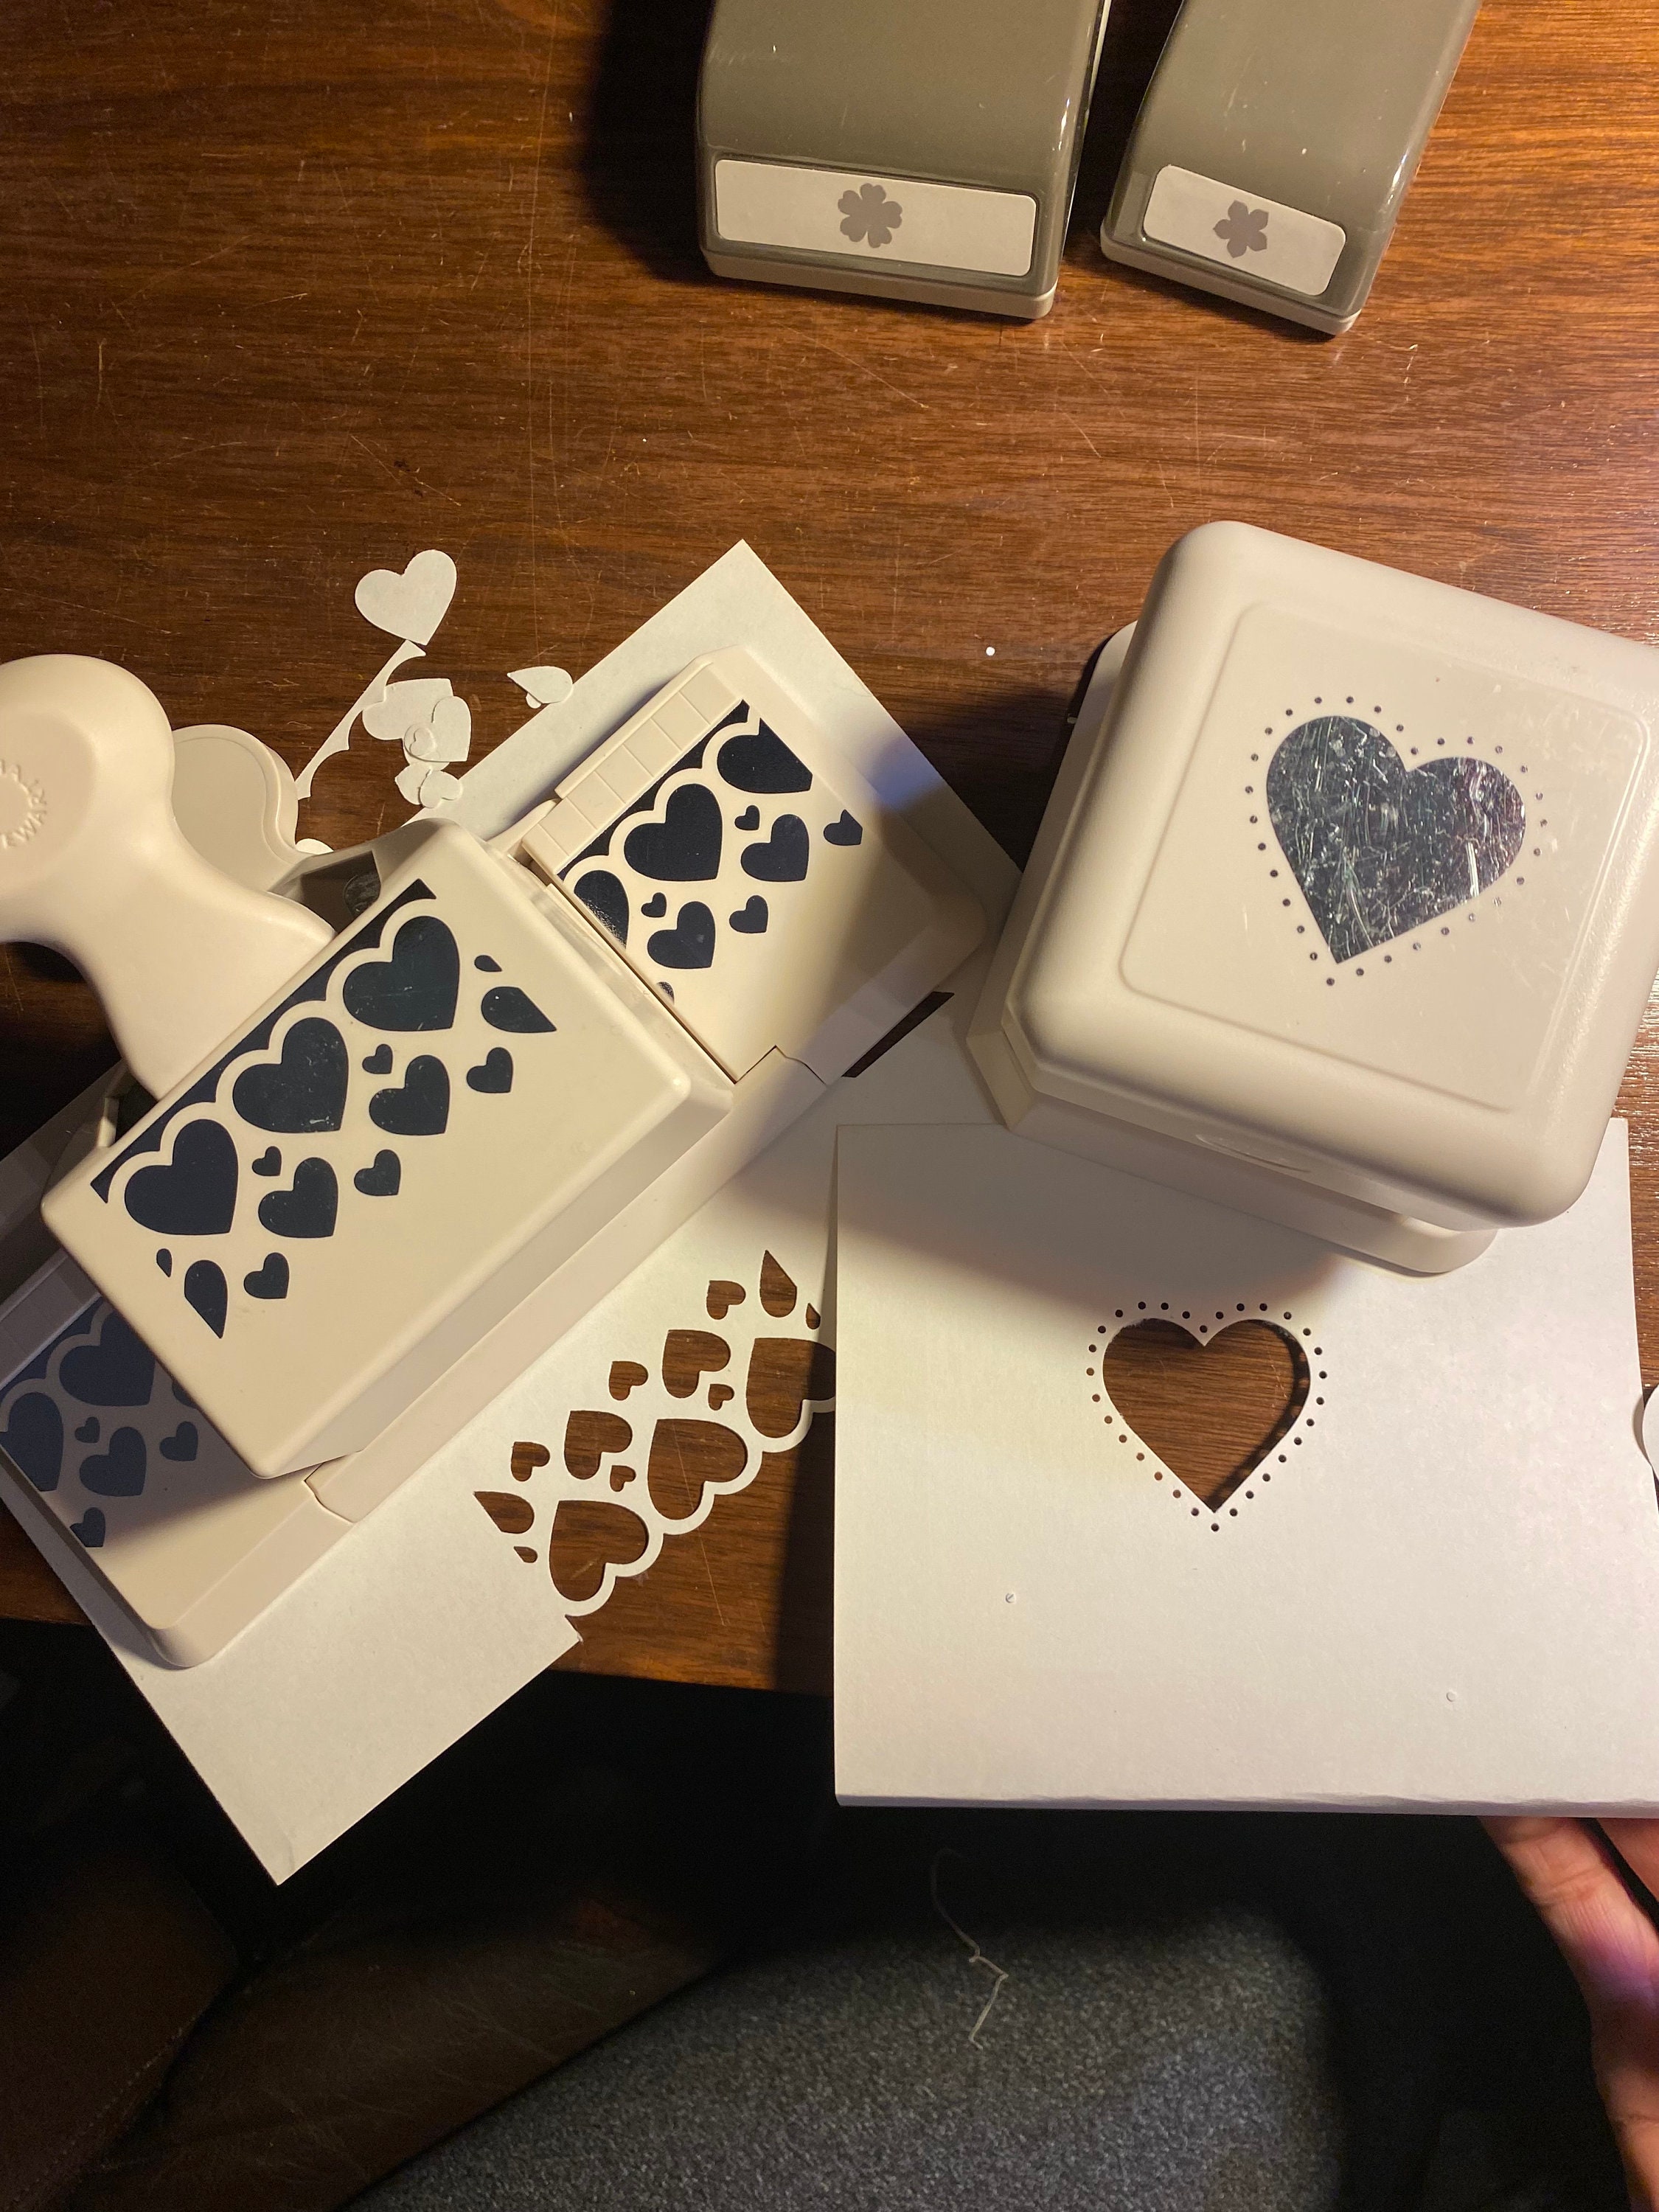 Good heart shaped paper punches Images, amazing heart shaped paper punches  or heart shaped leis heart punch and three paper hearts 89 heart shaped  paper punch l…